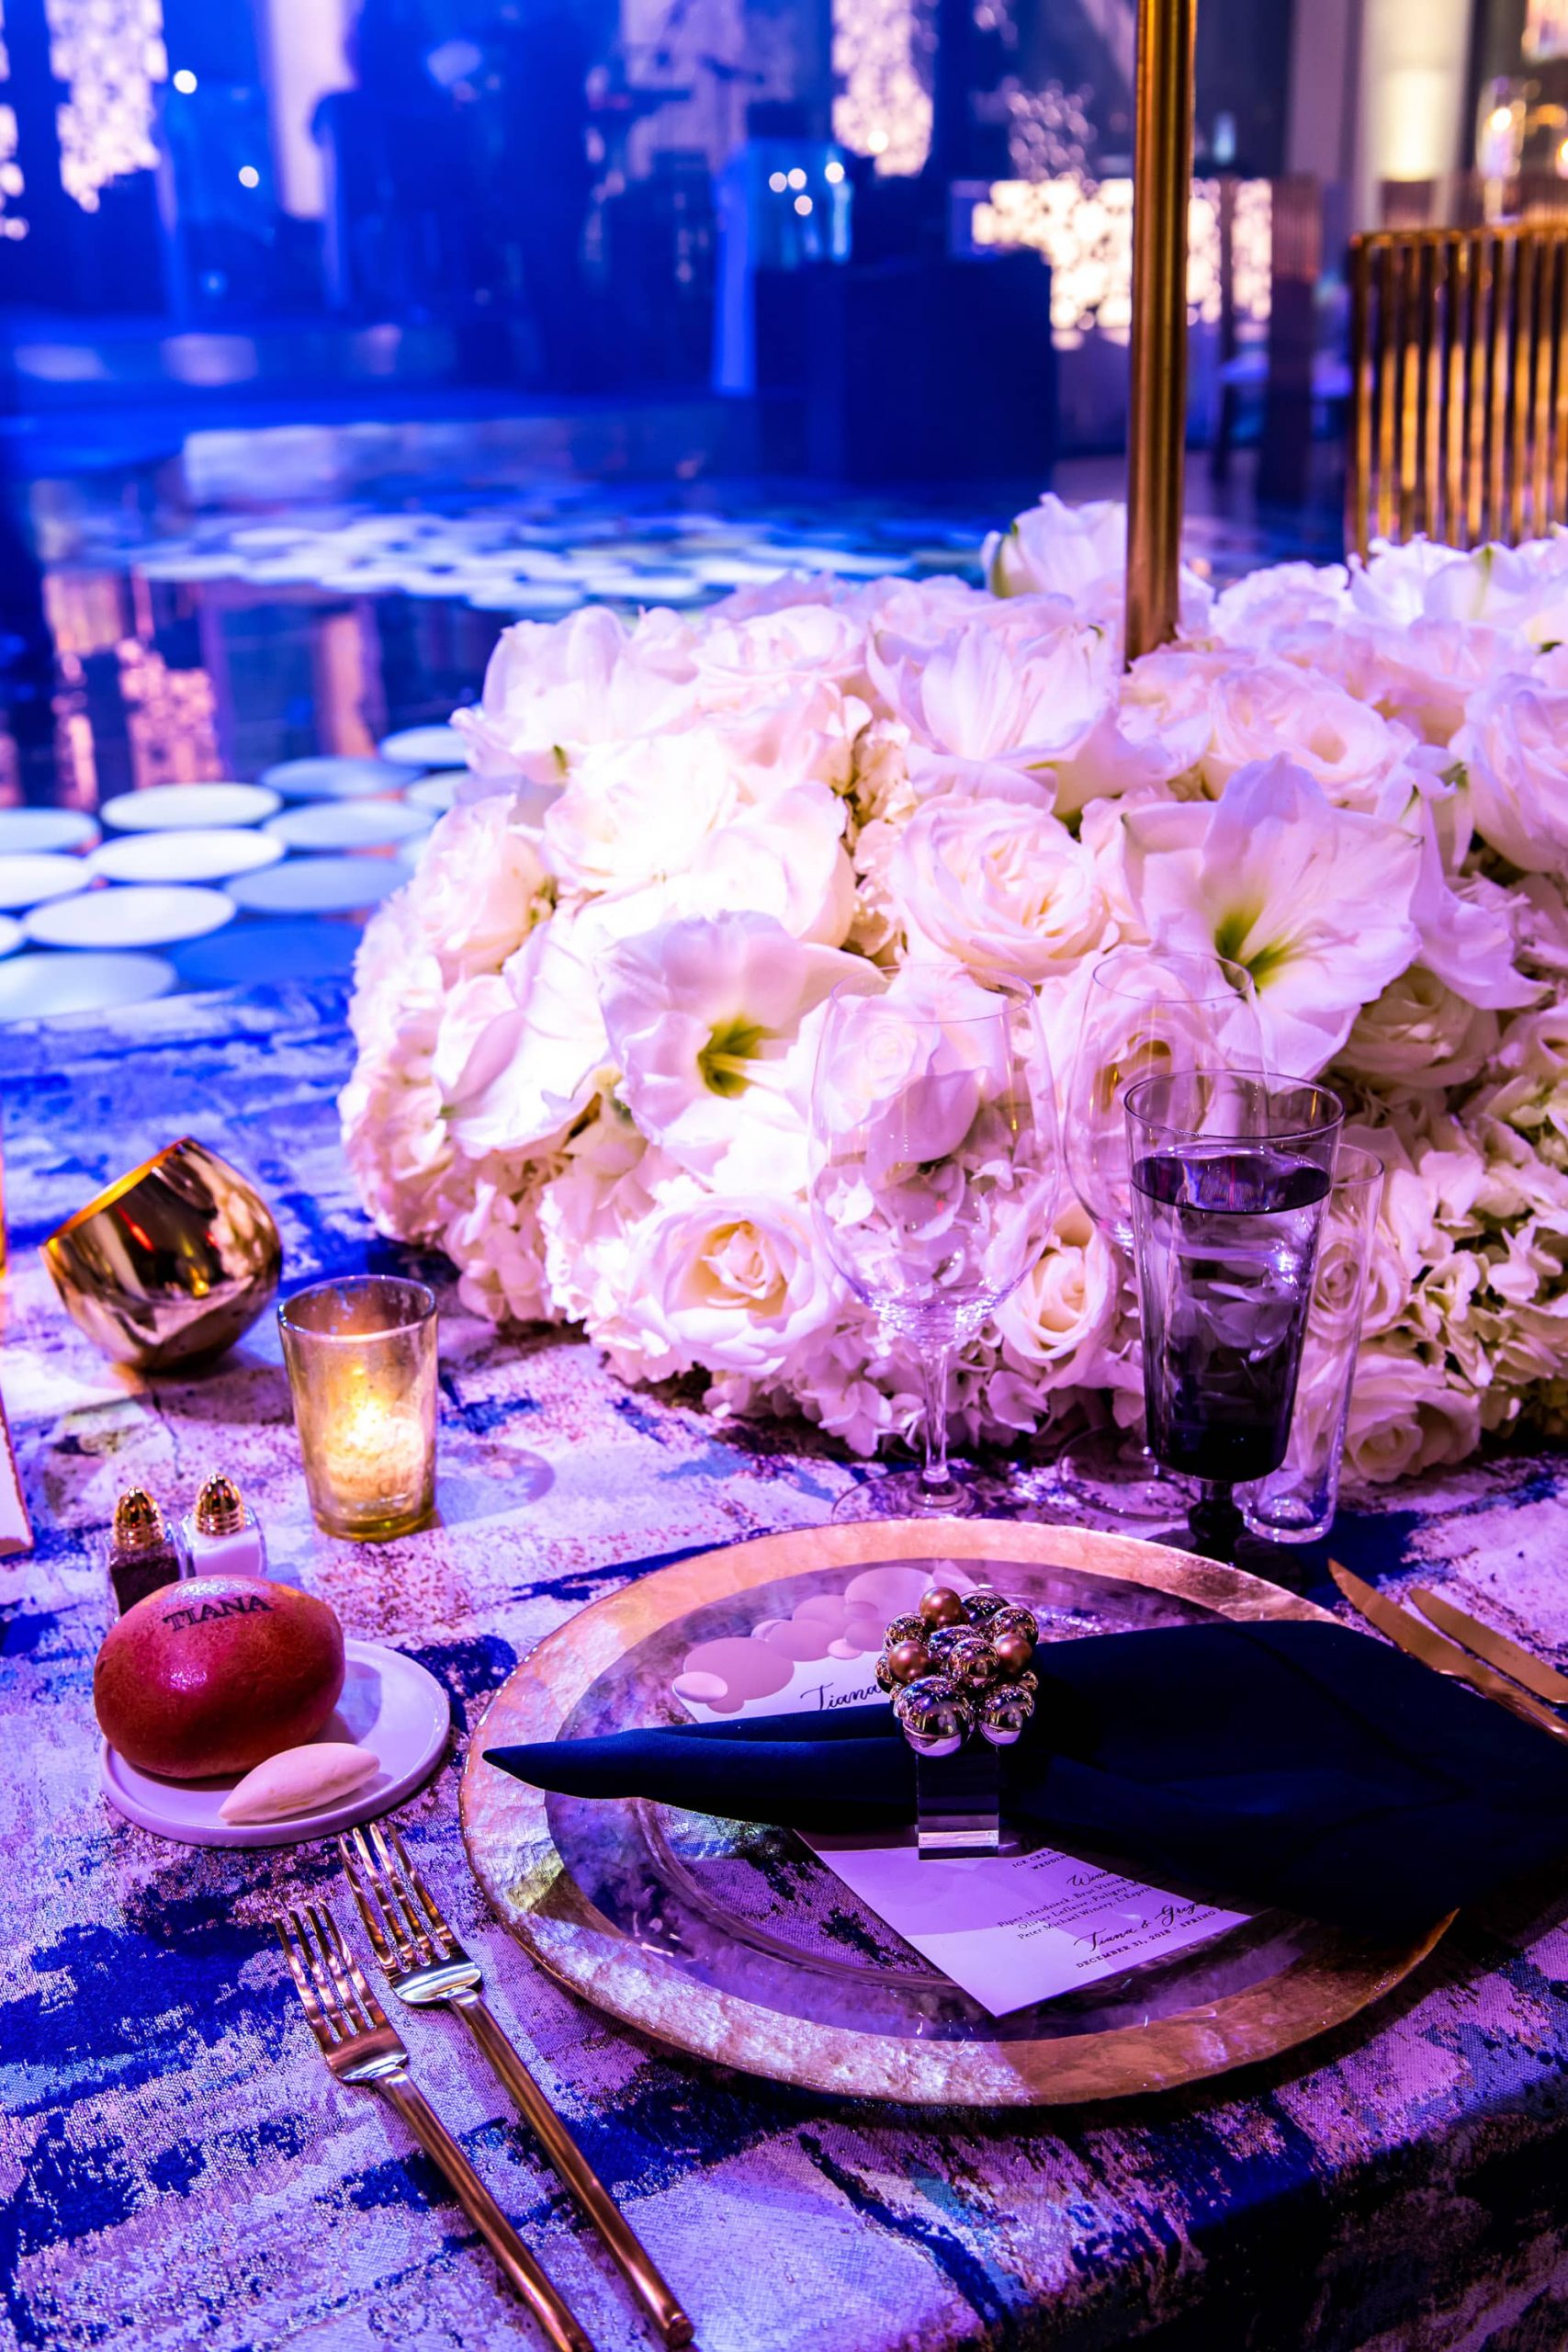 Table decor at champagne bottle-inspired reception at this NYE wedding in New York City | Photo by Gruber Photo